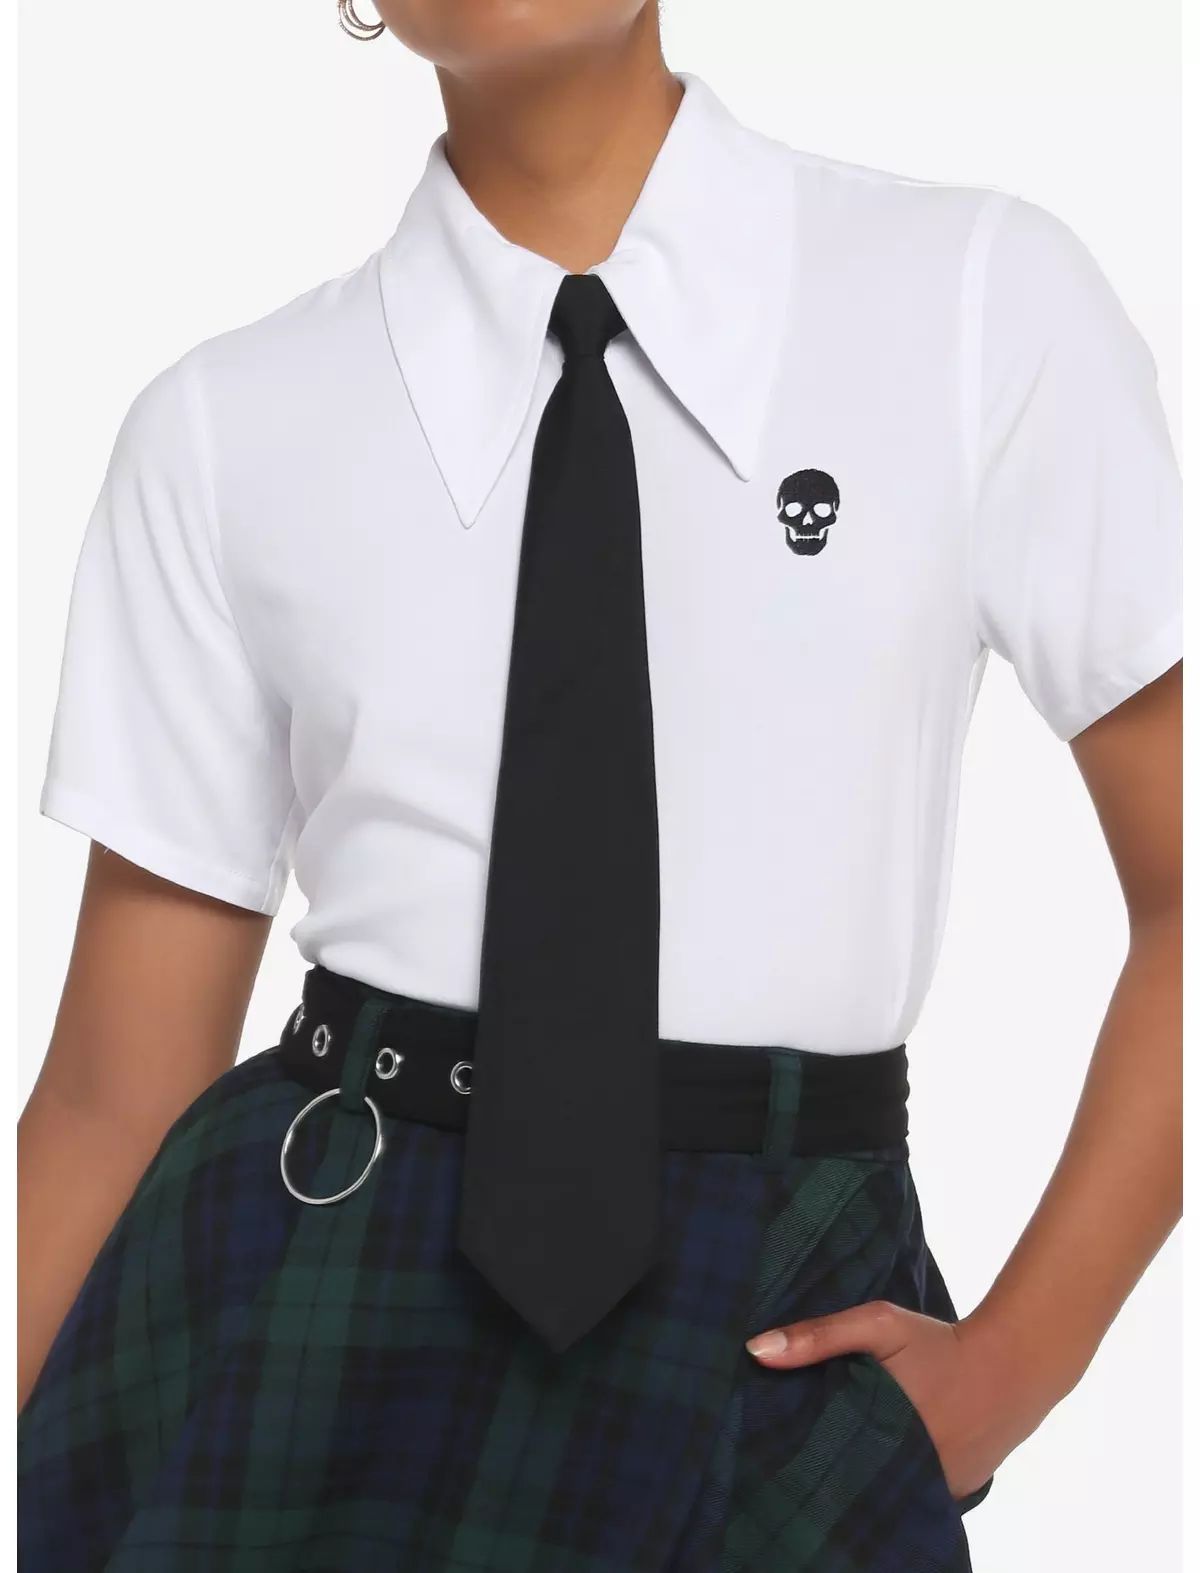 Black Skull Girls Woven Button-Up Top With Clip-On Tie | Hot Topic